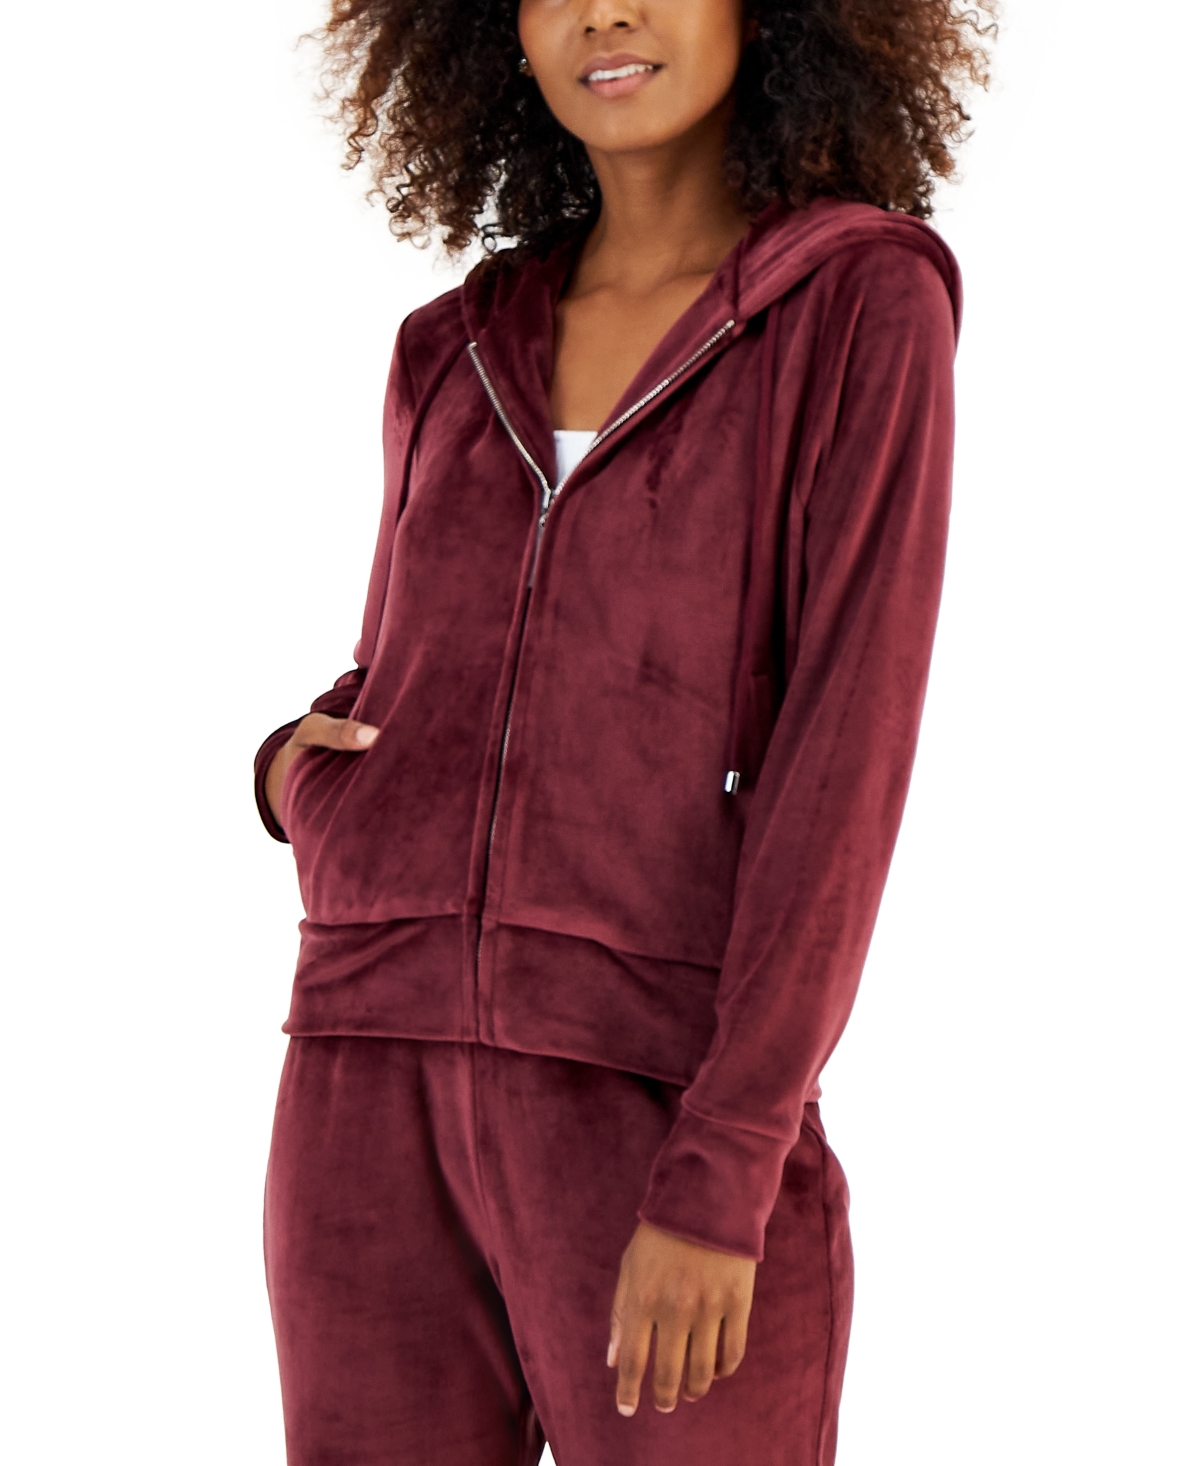  Inc International Concepts Women's Velour Zip-Up Hoodie, Created for Macy's